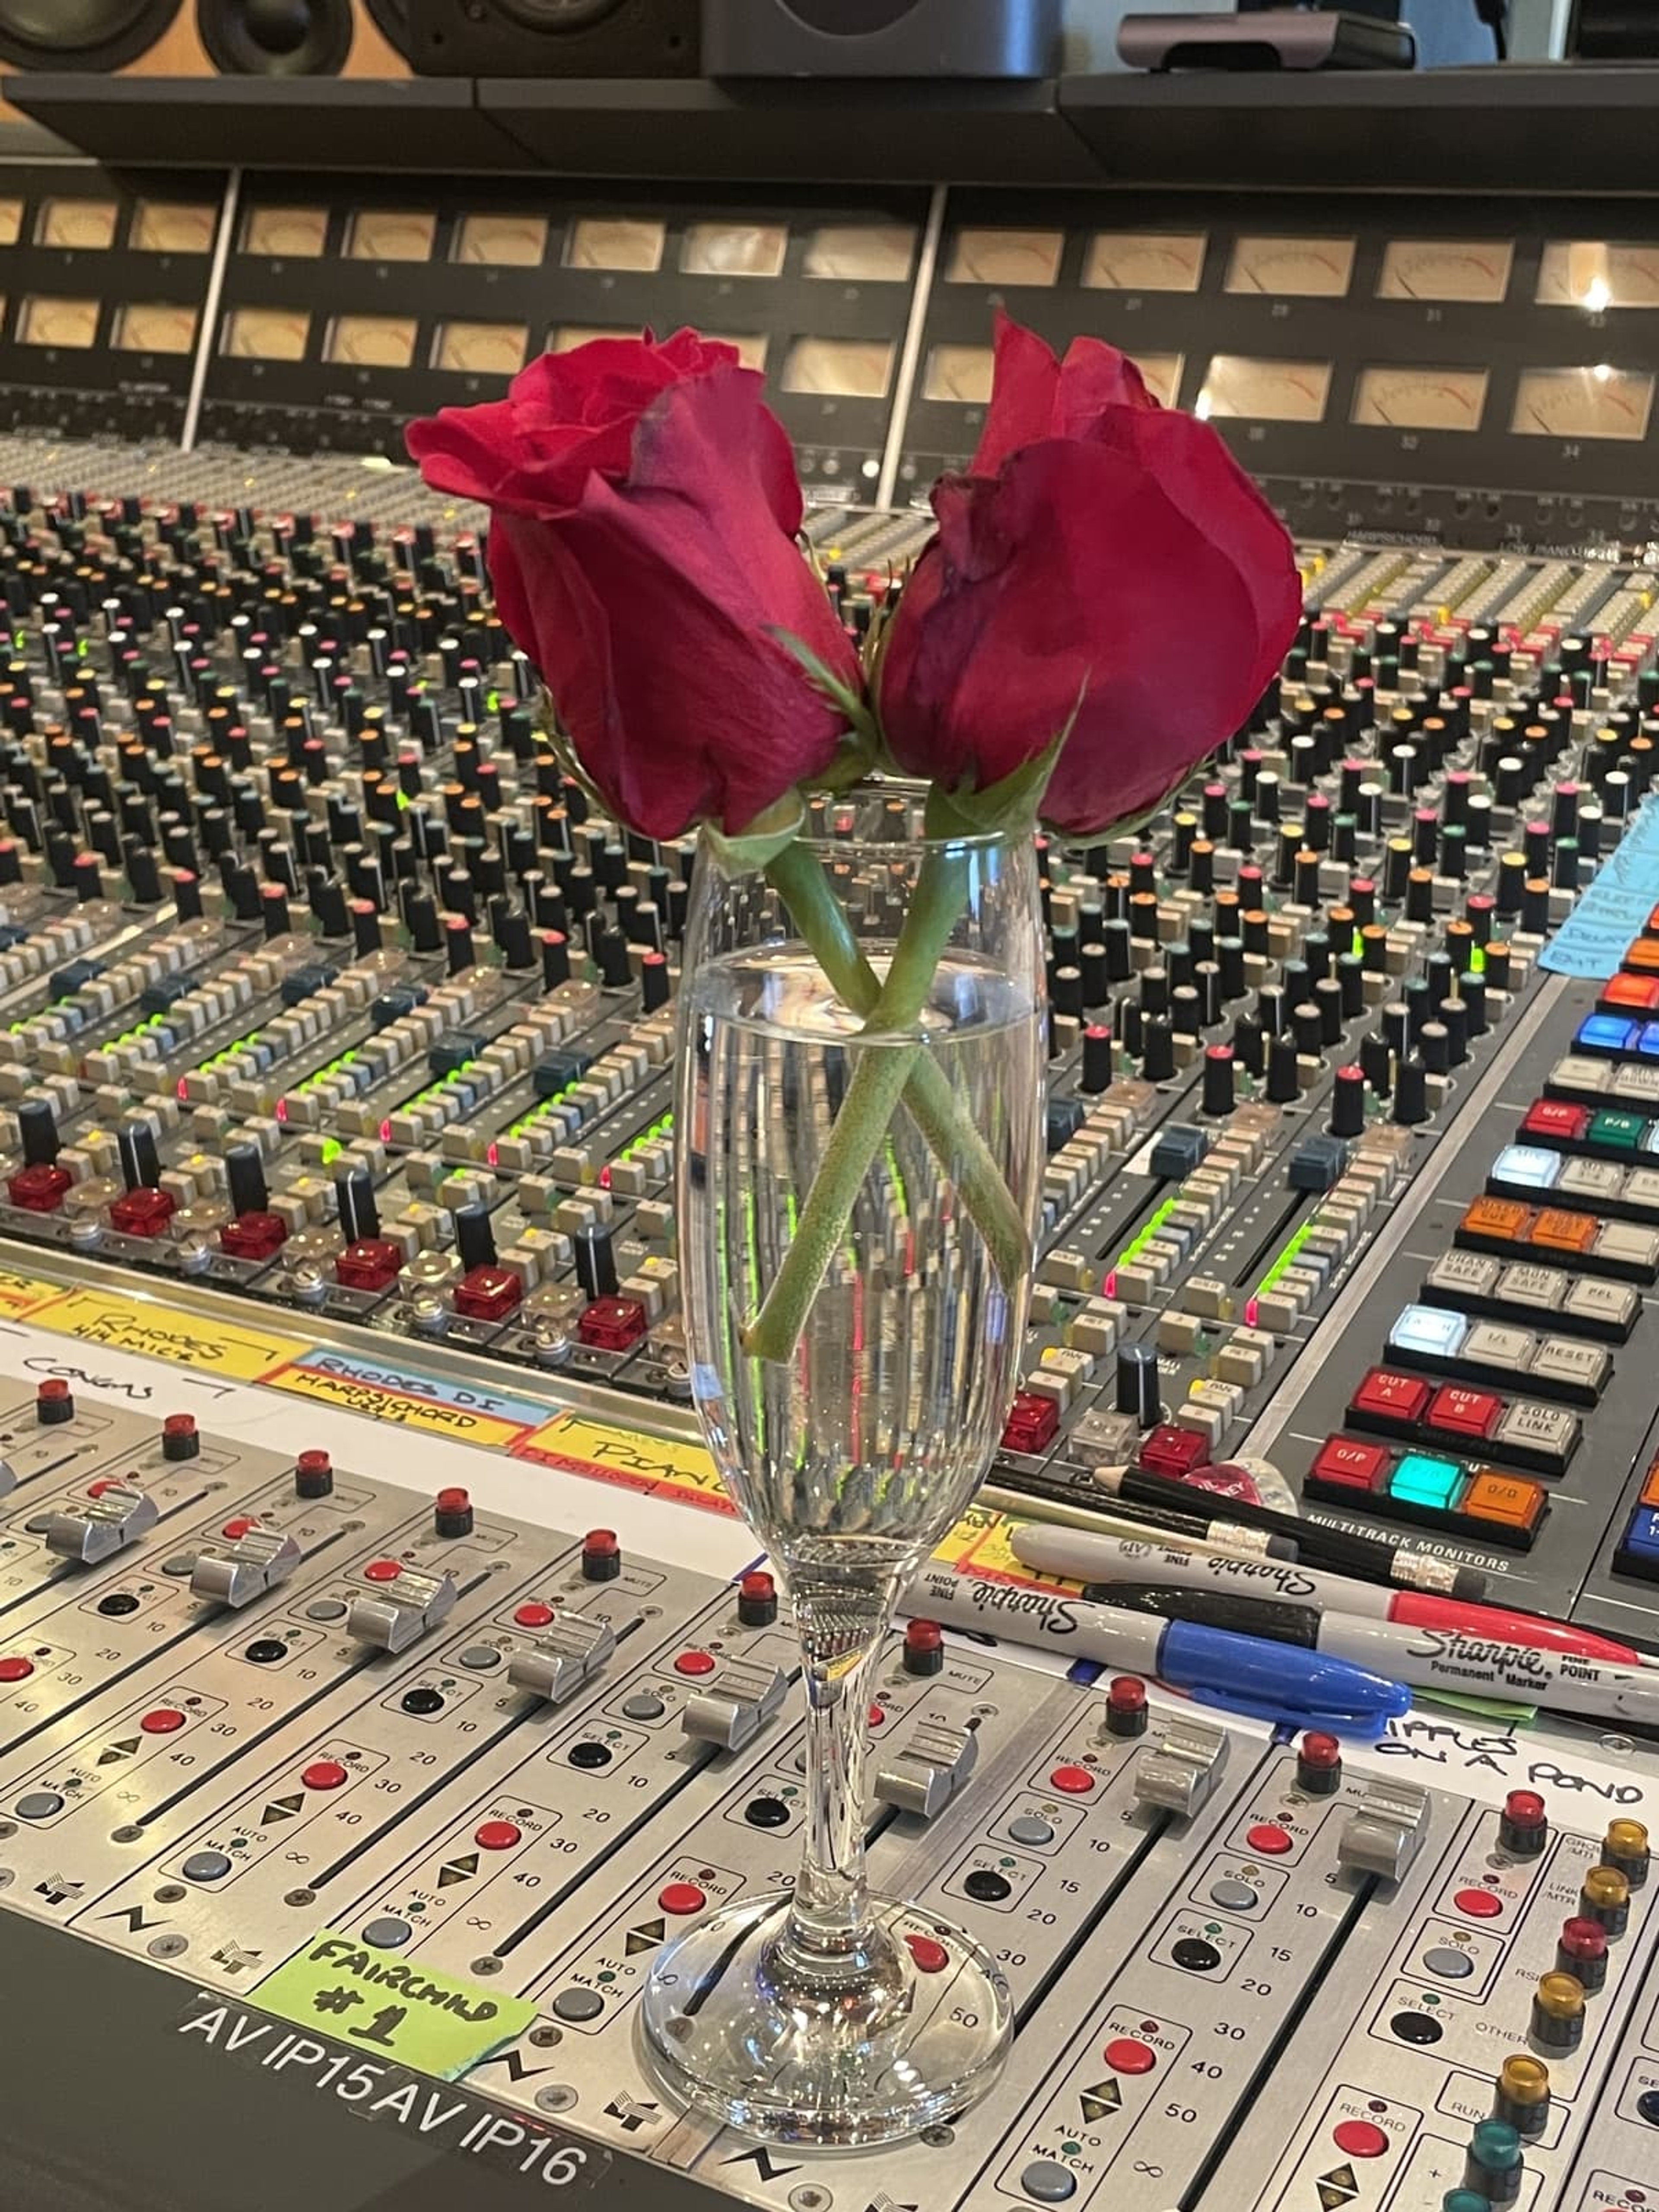 Two roses in a champagne glass, perched on a mixing desk